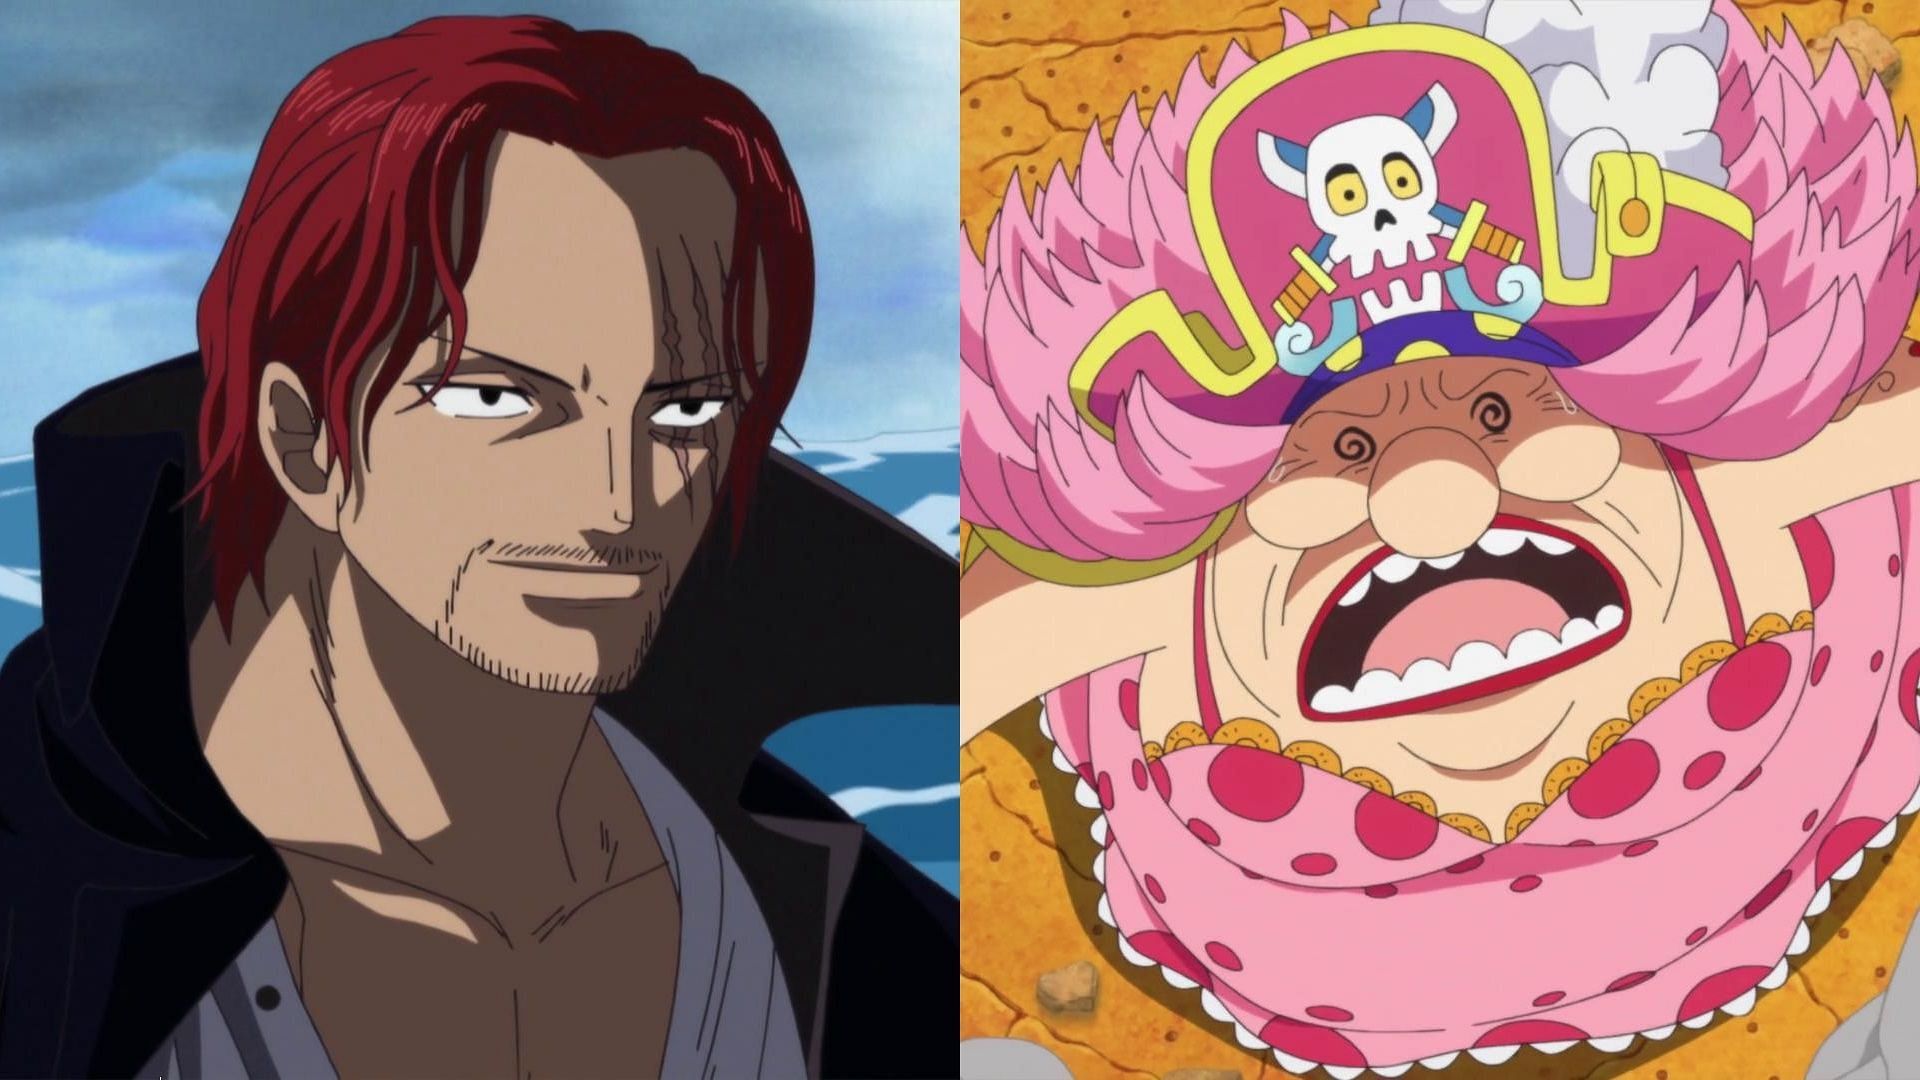 Both Shanks and Big Mom are Emperors, but there